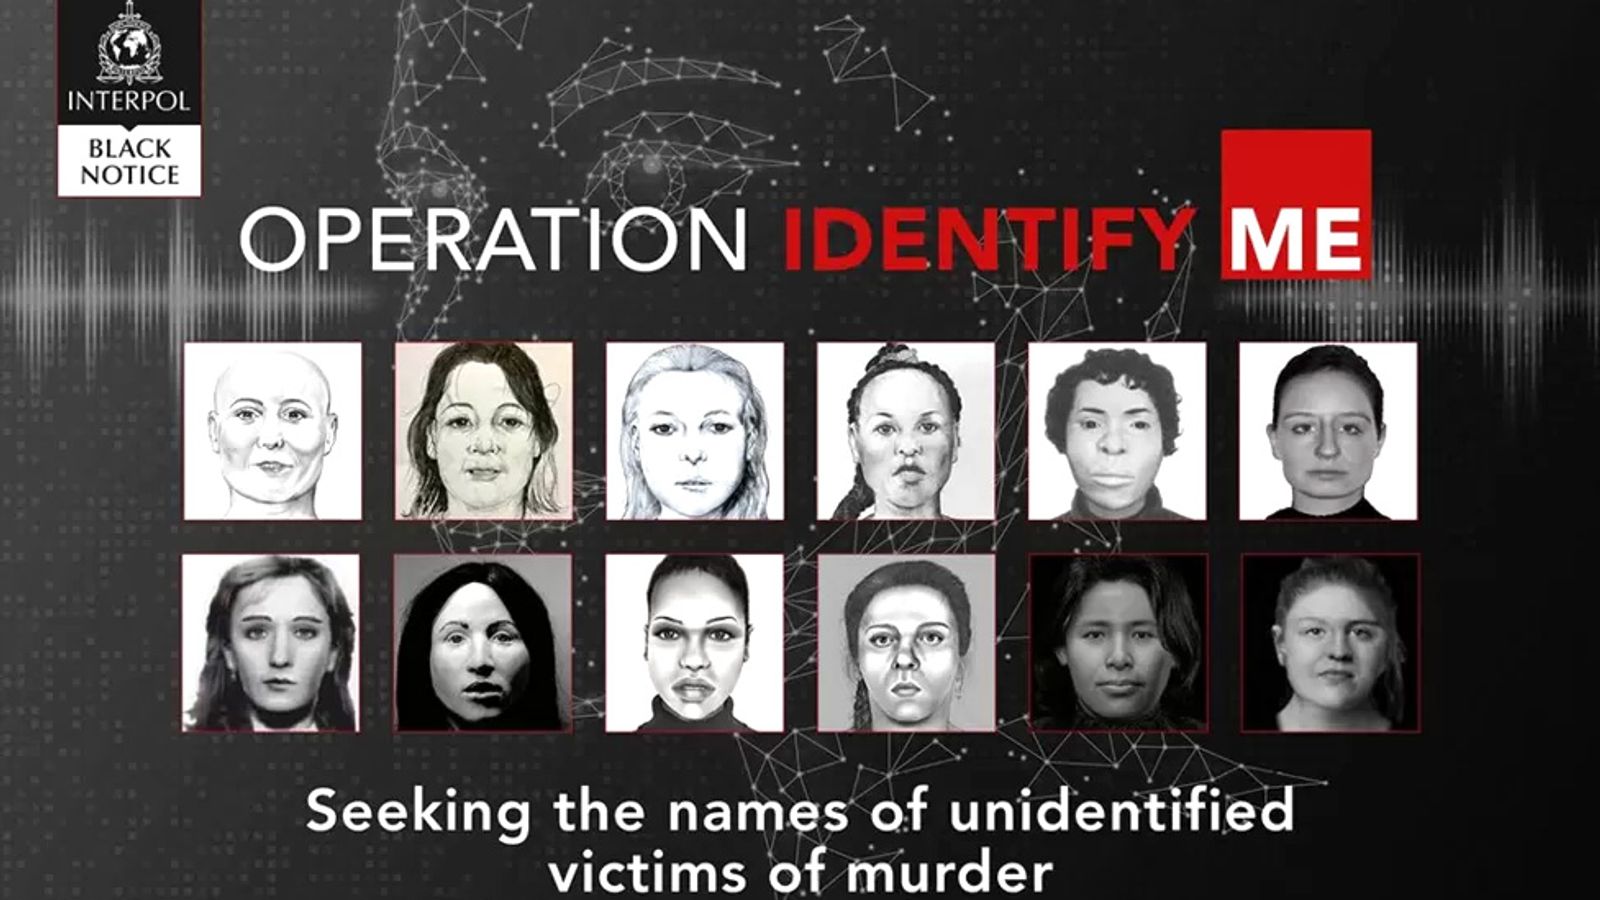 Police from Belgium, Germany and the Netherlands need help to identify 22 dead women and girls